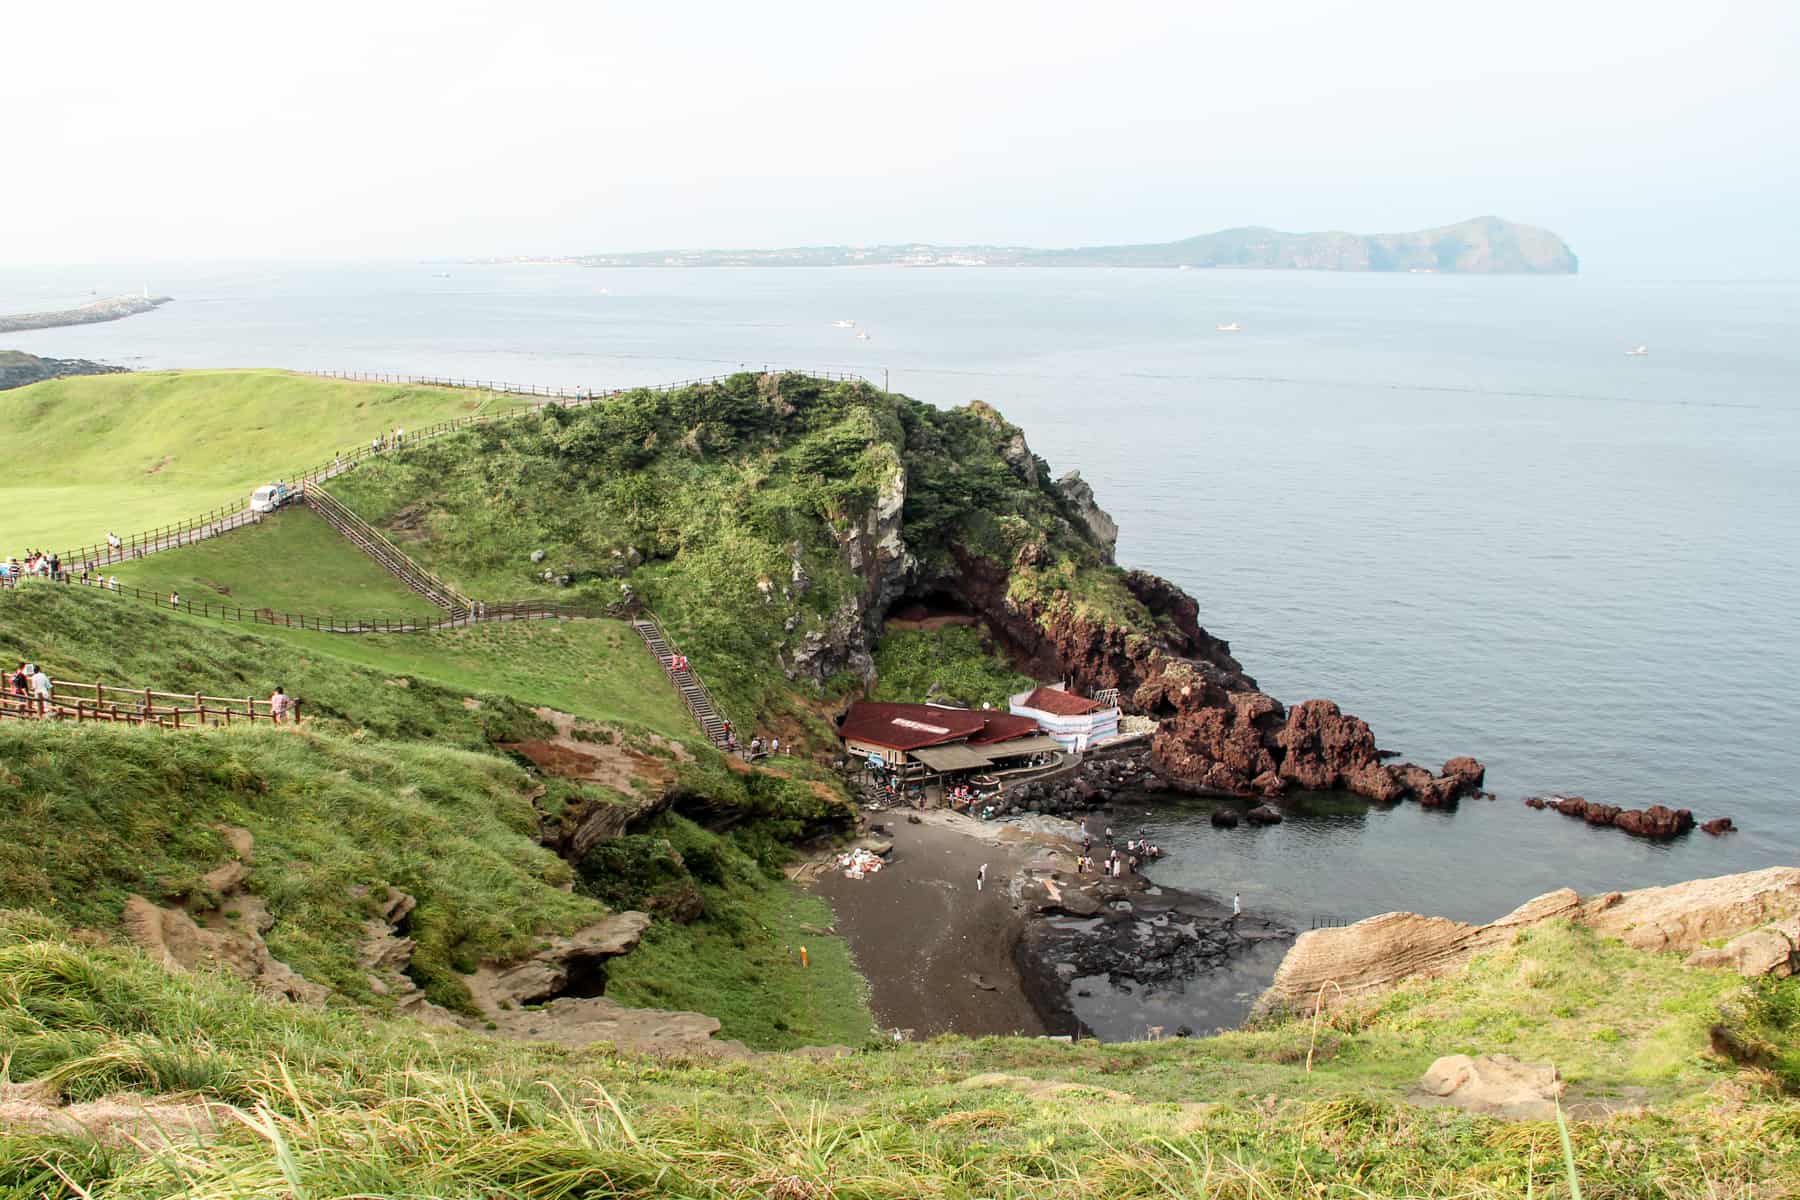 People strolling up a series of narrow walking paths on a green mound of Jeju Island's Sunrise Peak, looking down onto red-roofed houses, coastal rocks and the vast ocean